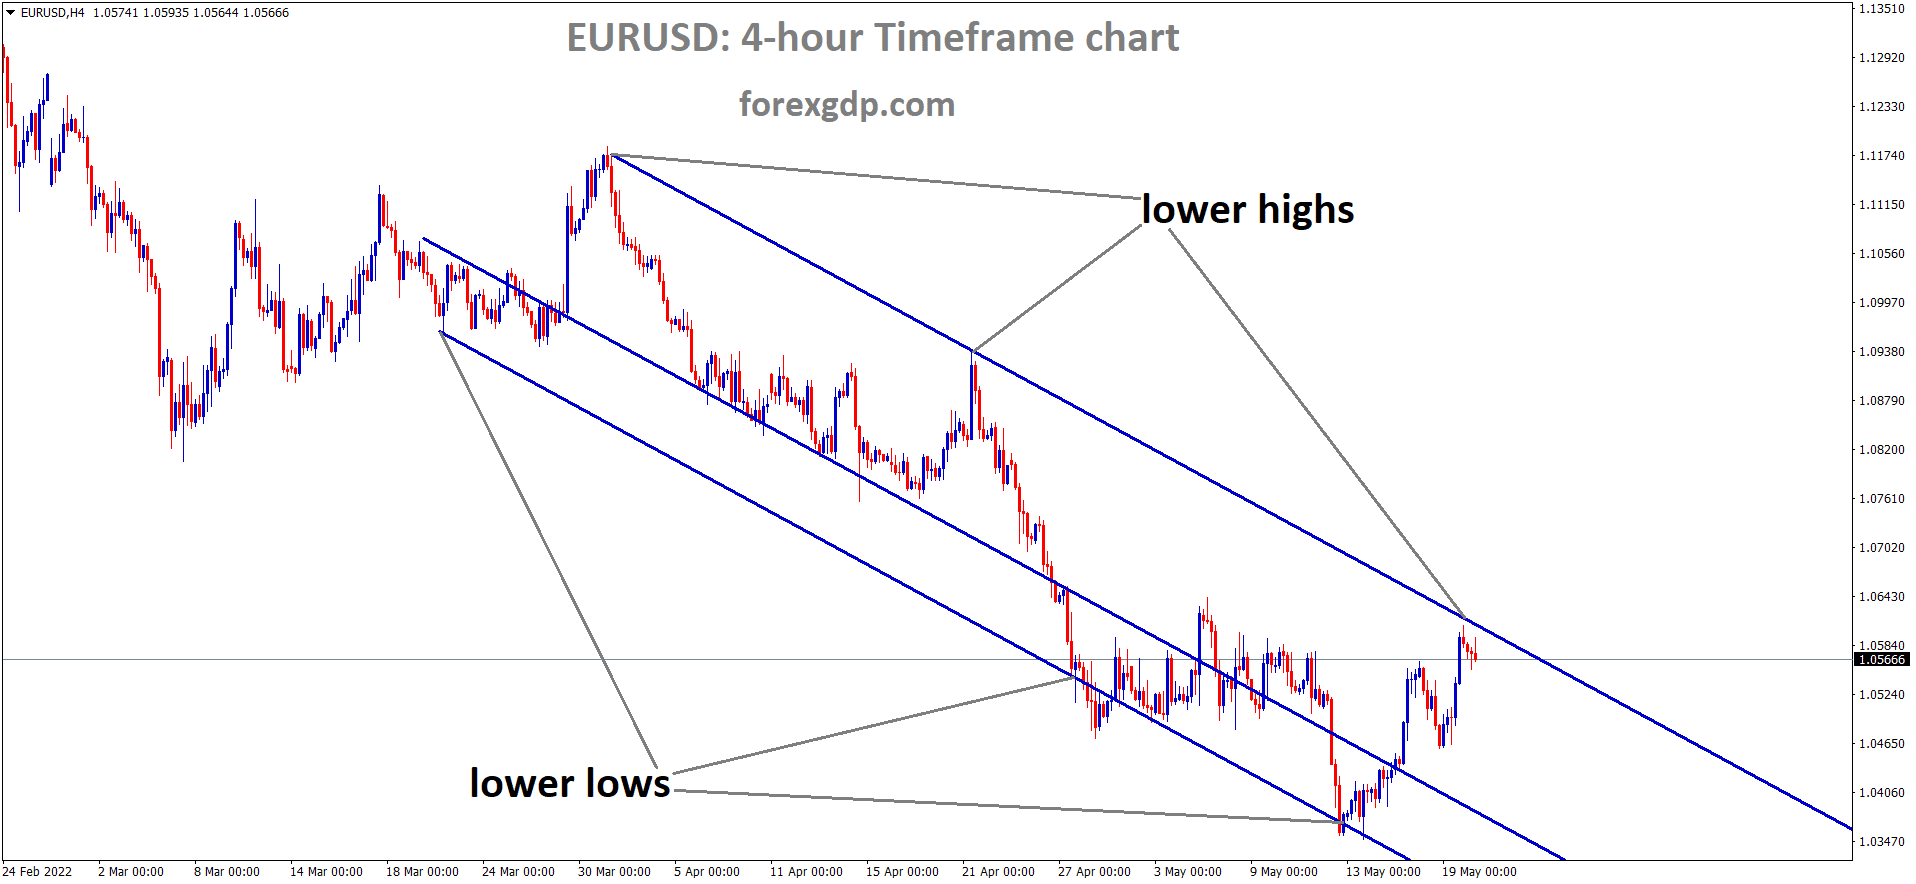 EURUSD H4 Time Frame Analysis Market is moving in the Descending channel and the market has Fallen from the Lower high area of the channel 1